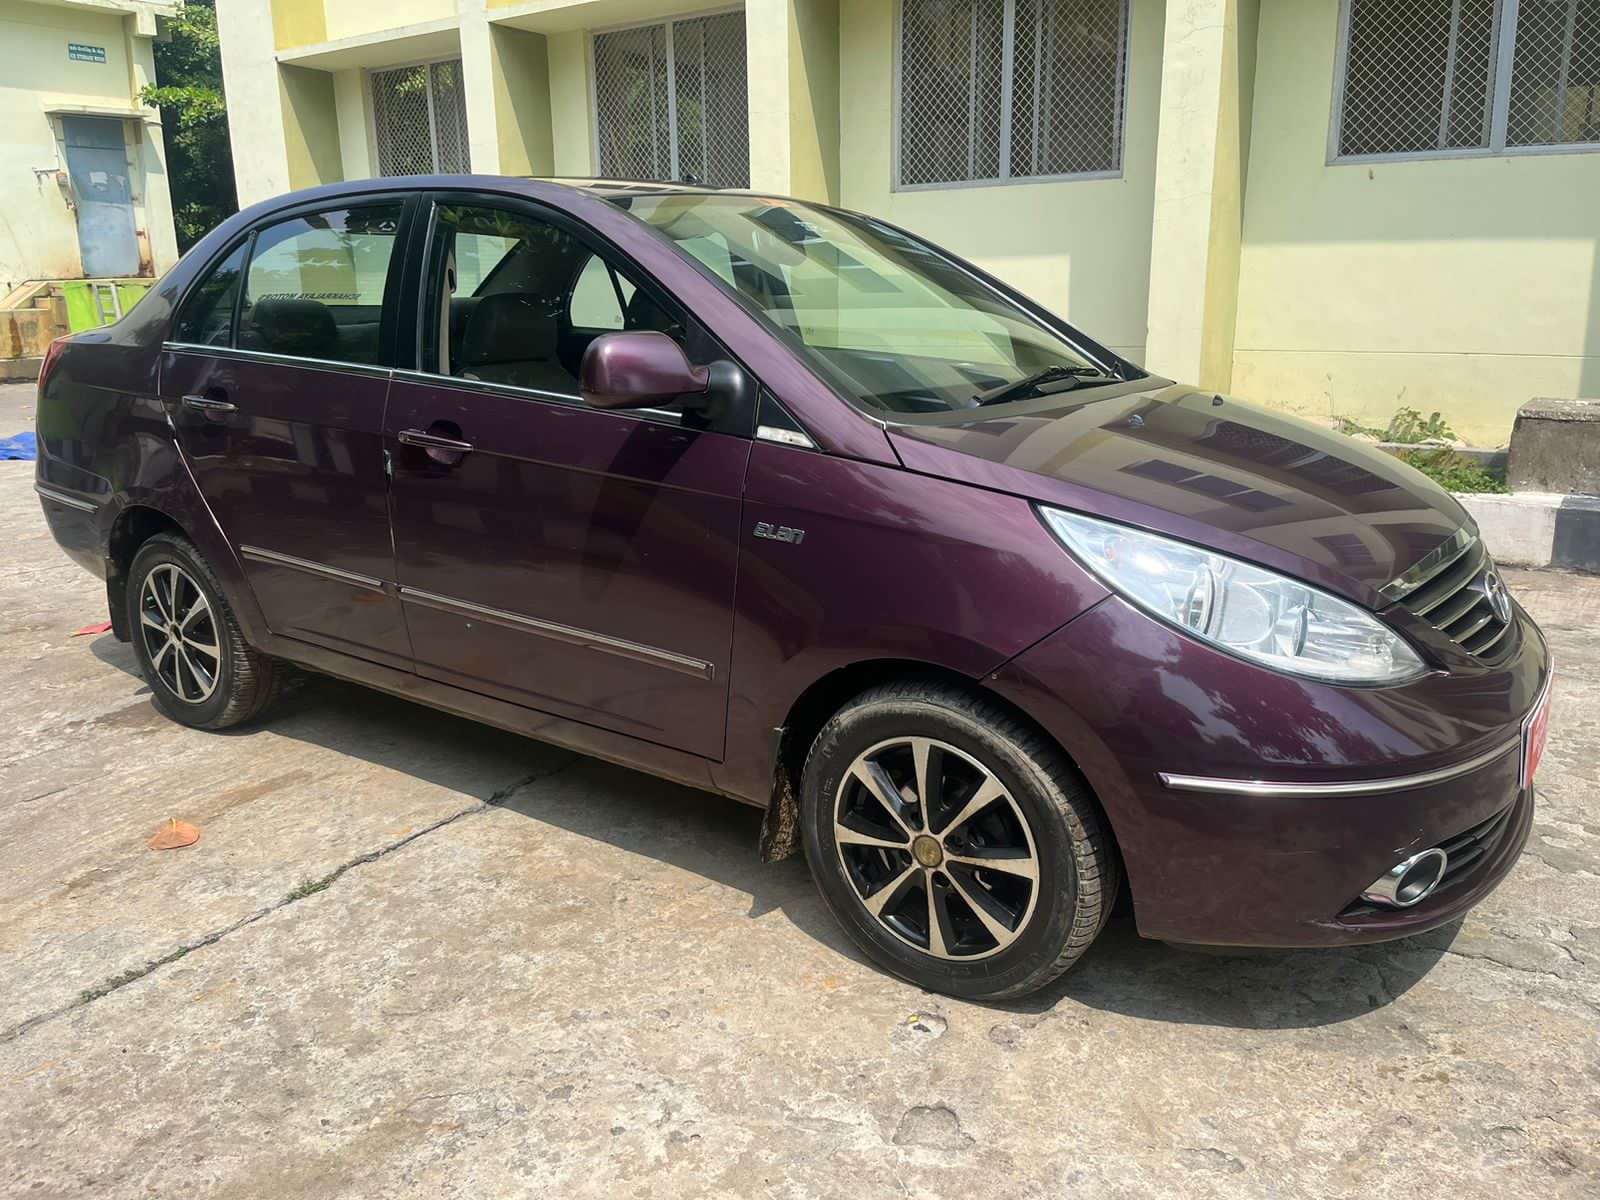 4793-for-sale-Tata-Motors-Manza-Diesel-First-Owner-2011-PY-registered-rs-264999